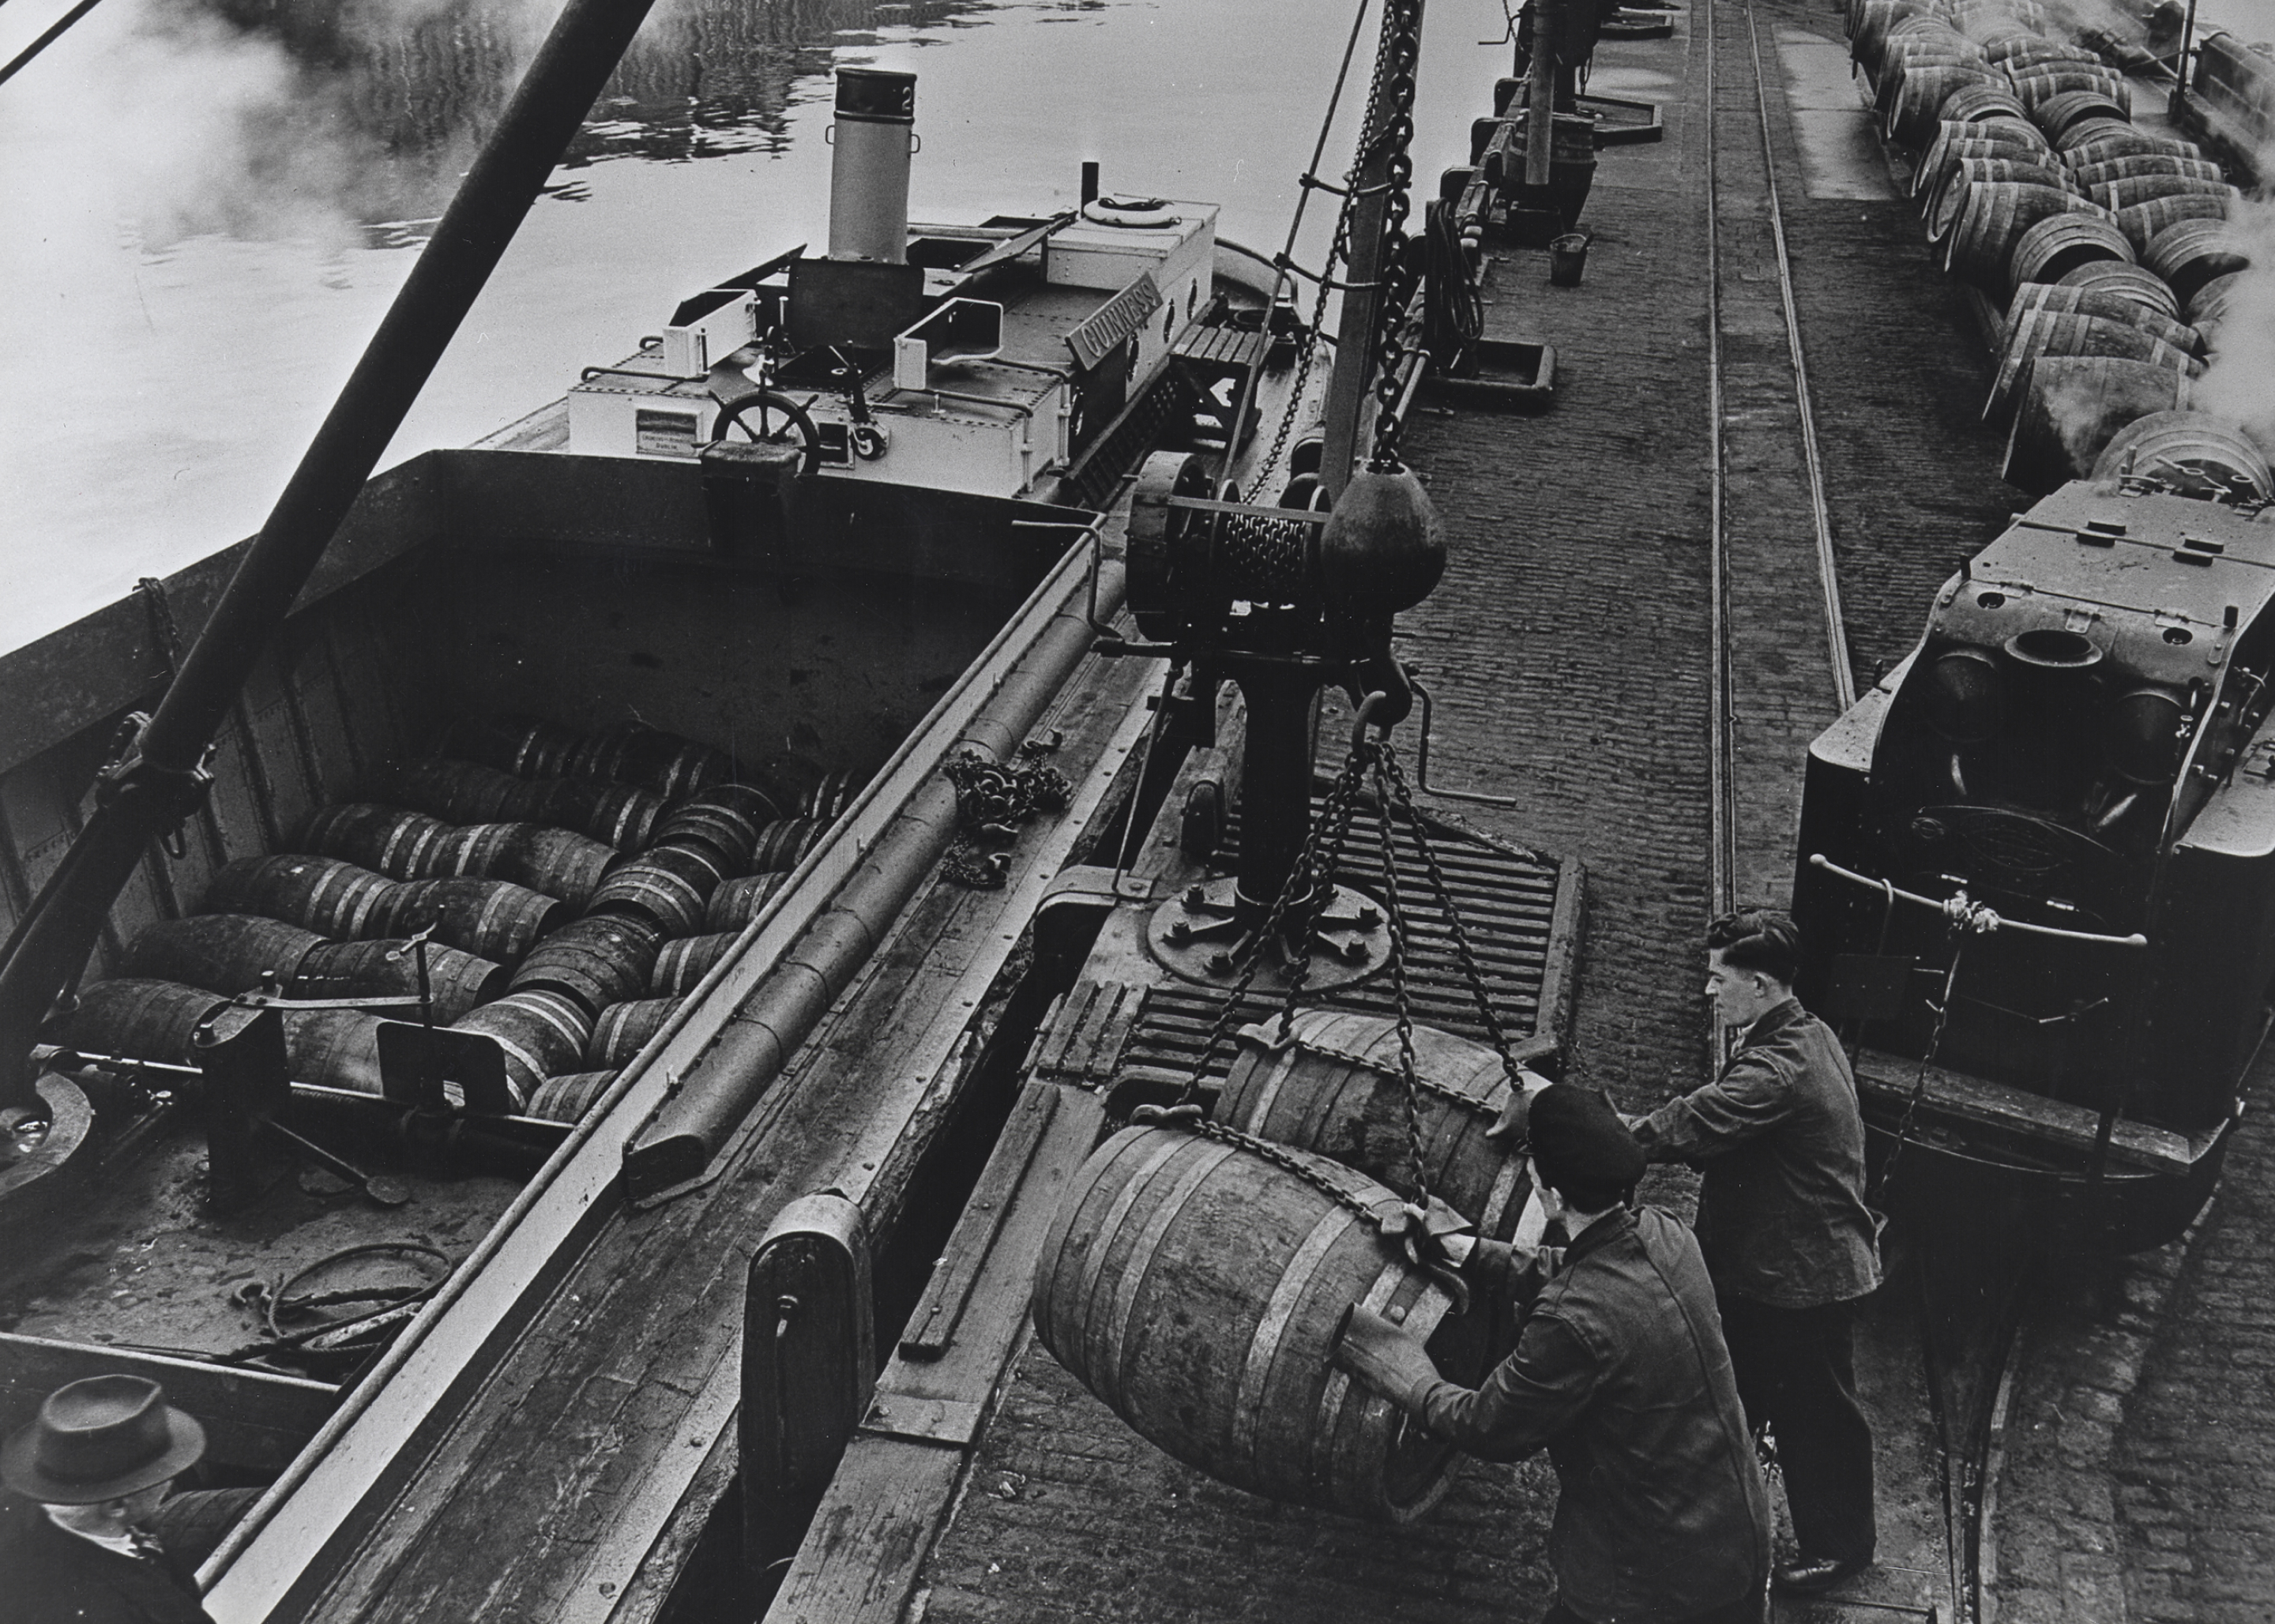 Photograph of barge being loaded with casks at Victoria Quay jetty from a Geoghegan engine, 1955.